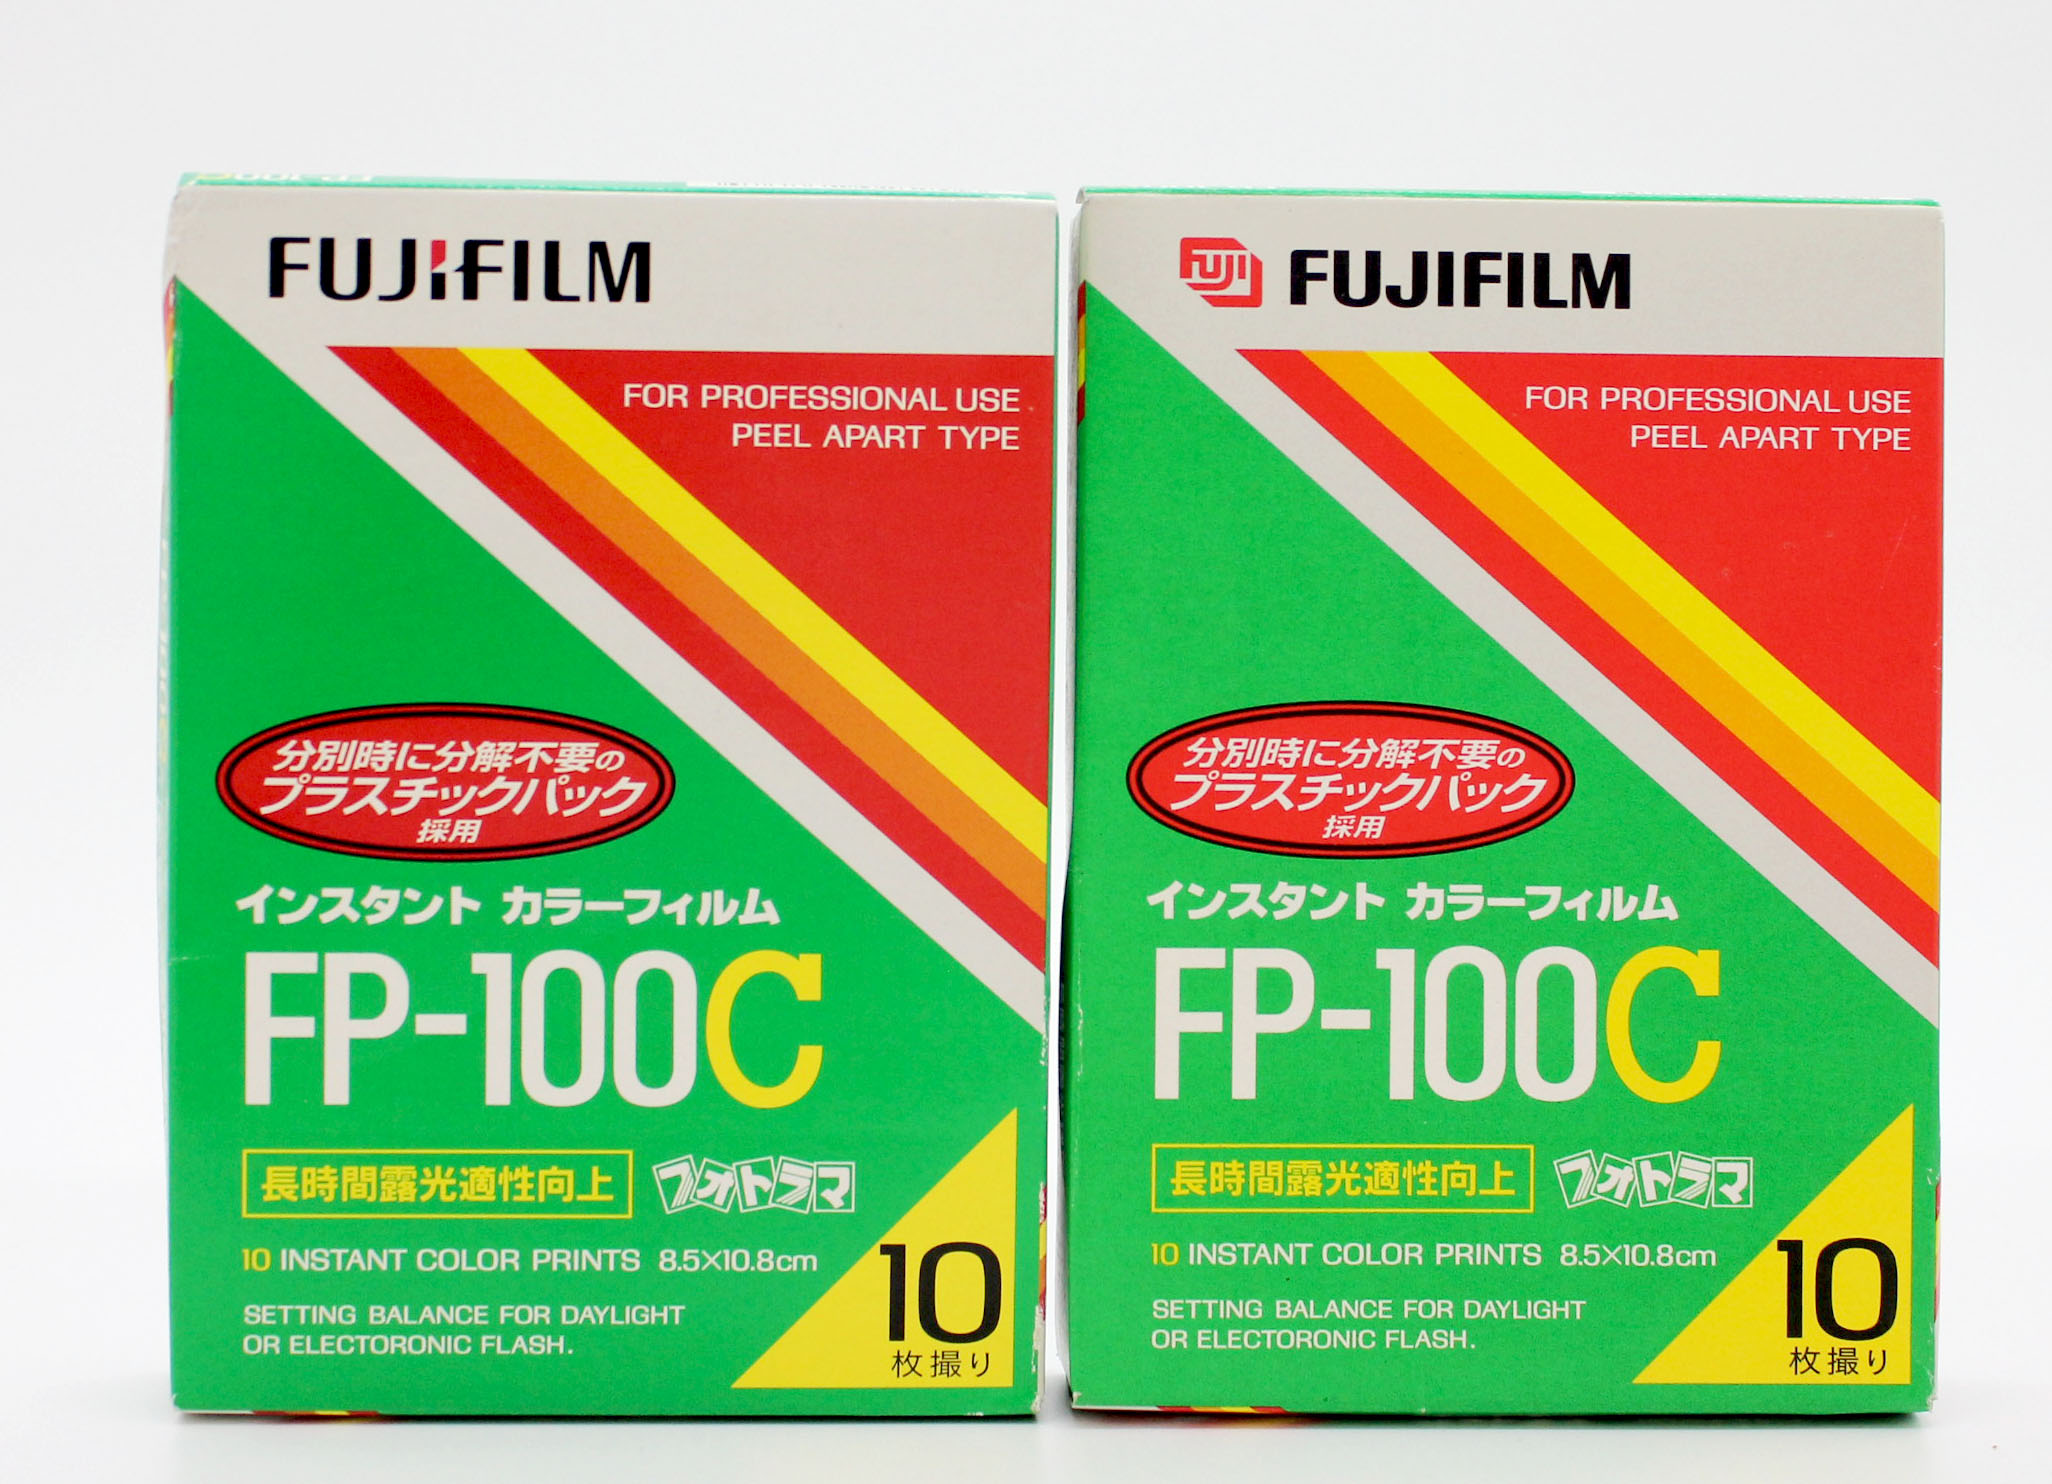  Fujifilm FP-100C Instant Color Film Set of 2 (Expired) from Japan Photo 0